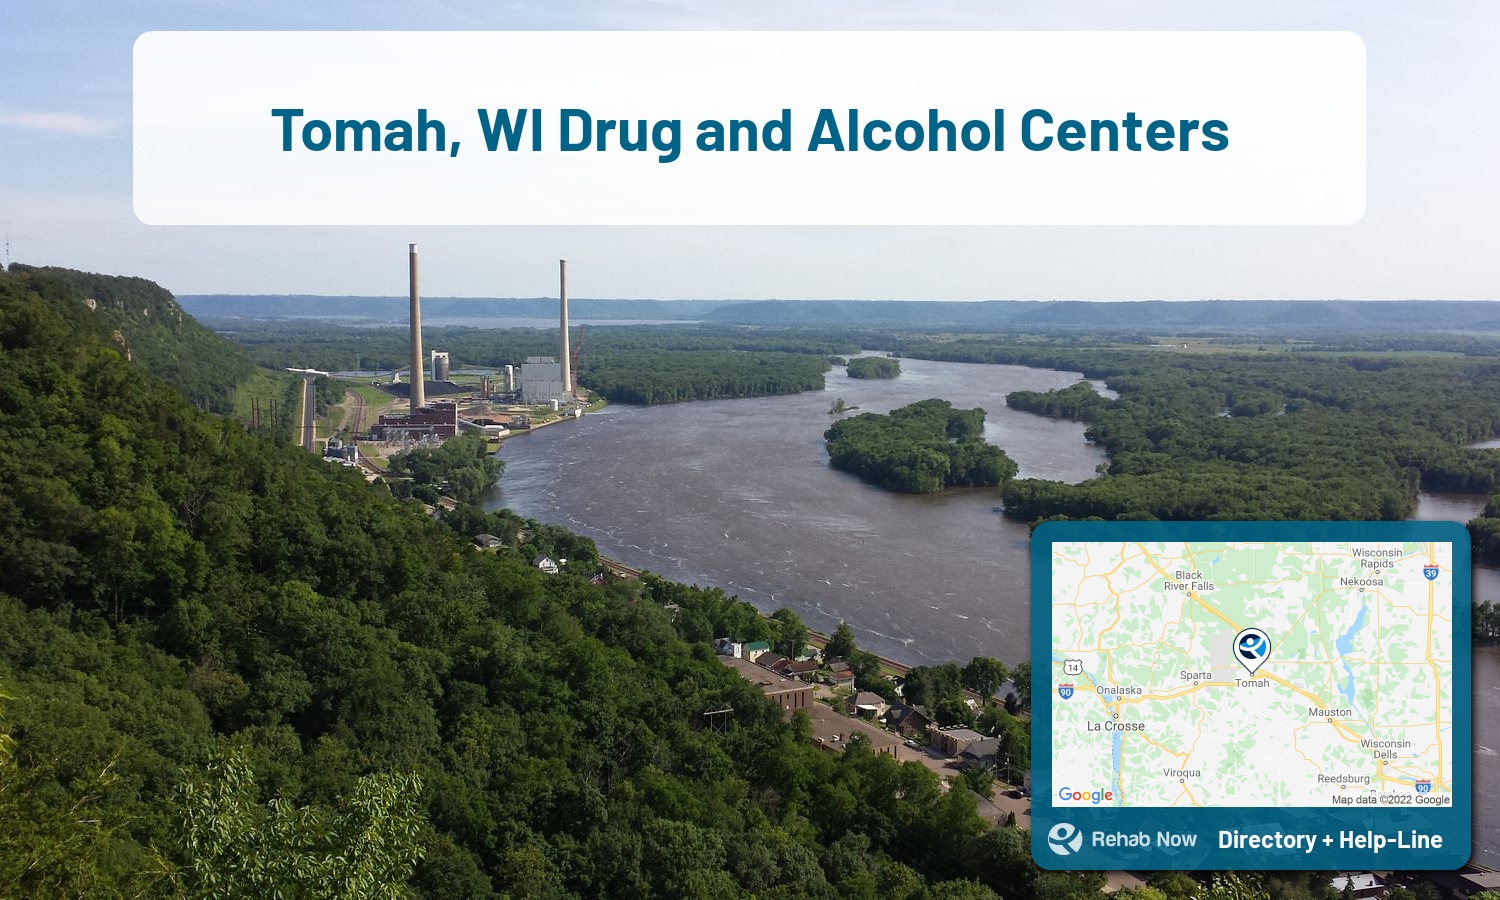 List of alcohol and drug treatment centers near you in Tomah, Wisconsin. Research certifications, programs, methods, pricing, and more.